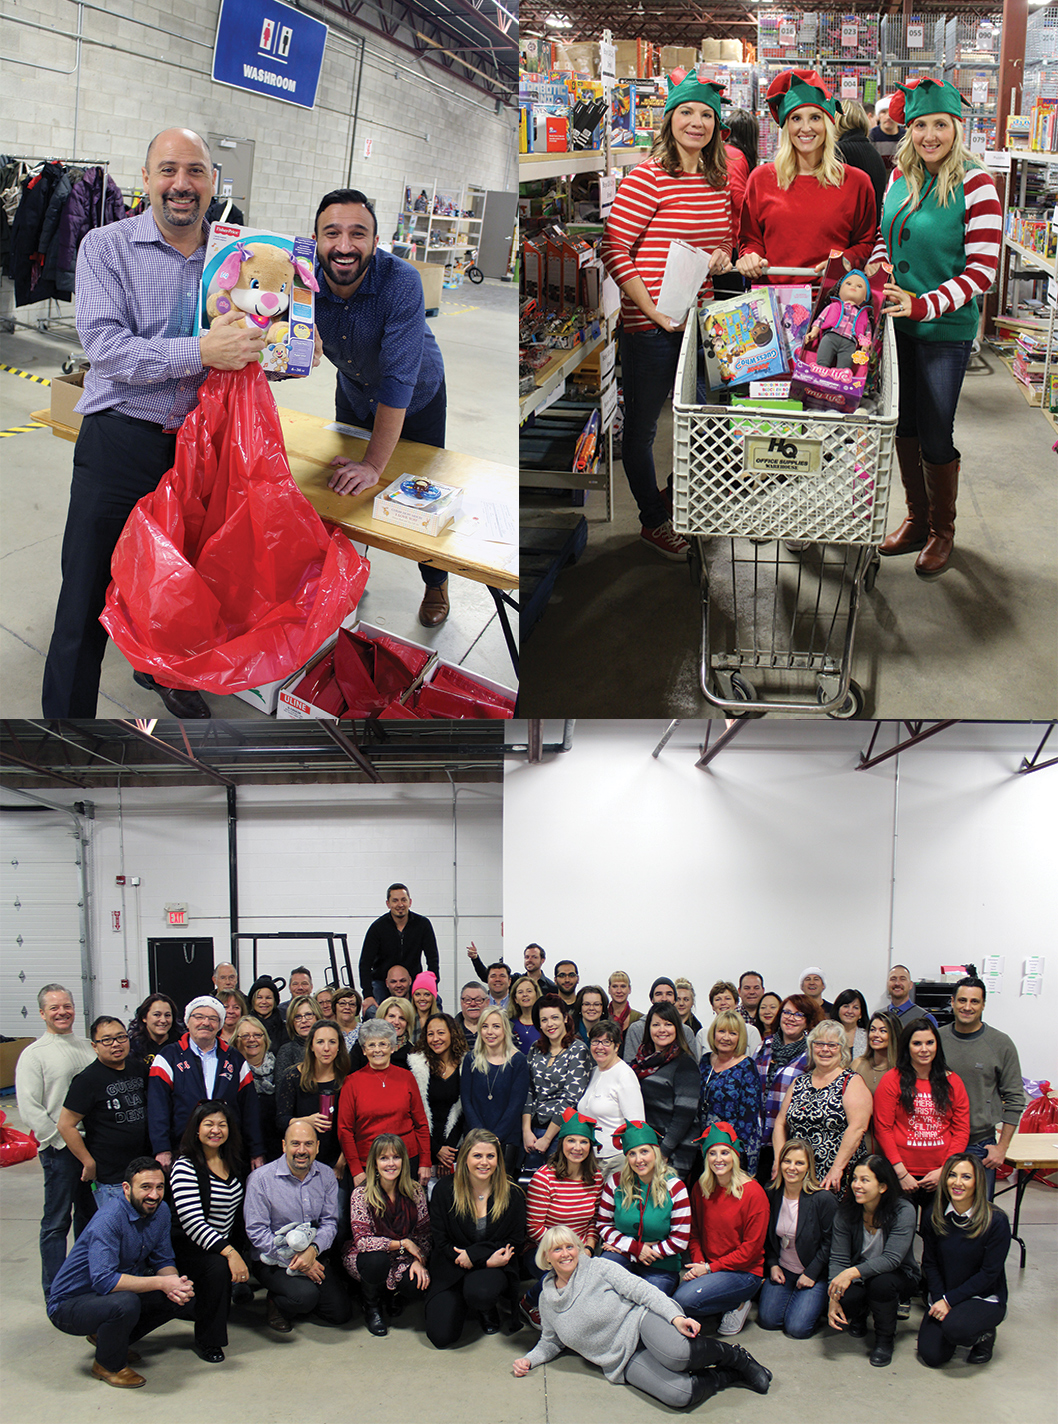 CIR Realty helps out at the Salvation Army's toy warehouse on December 6